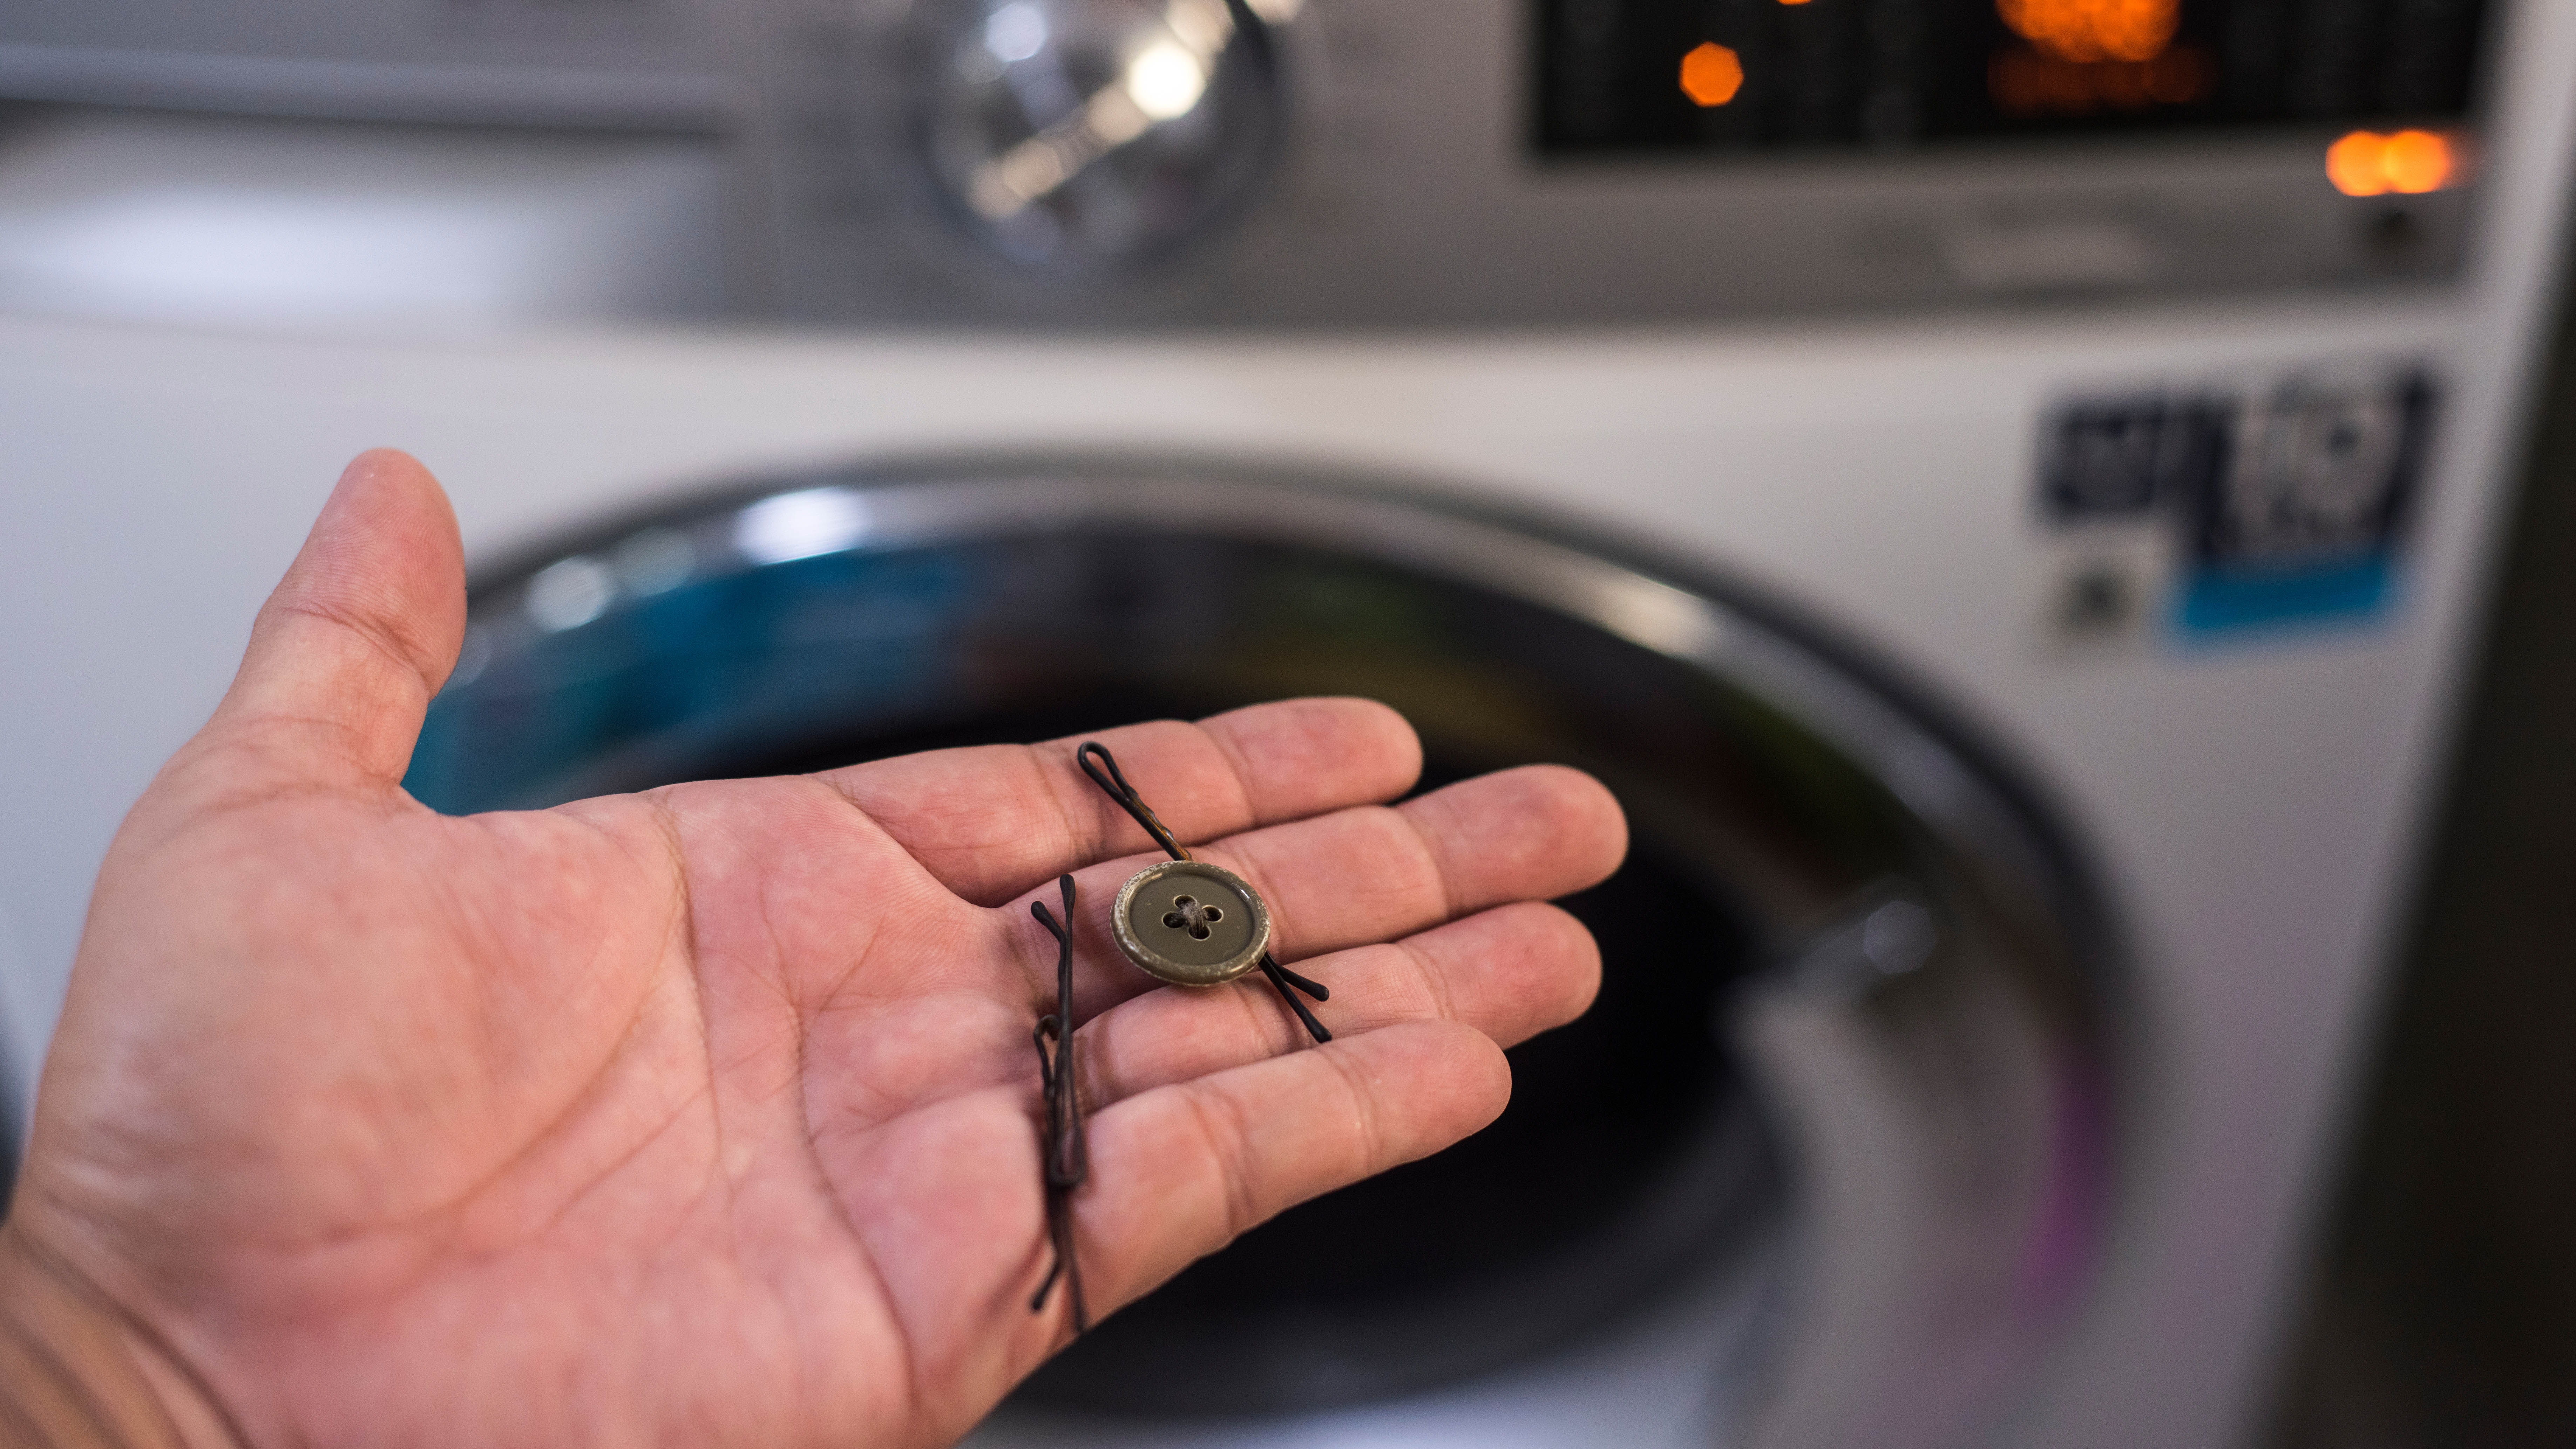 A person holding a hairpin and a button in front of the washing machine